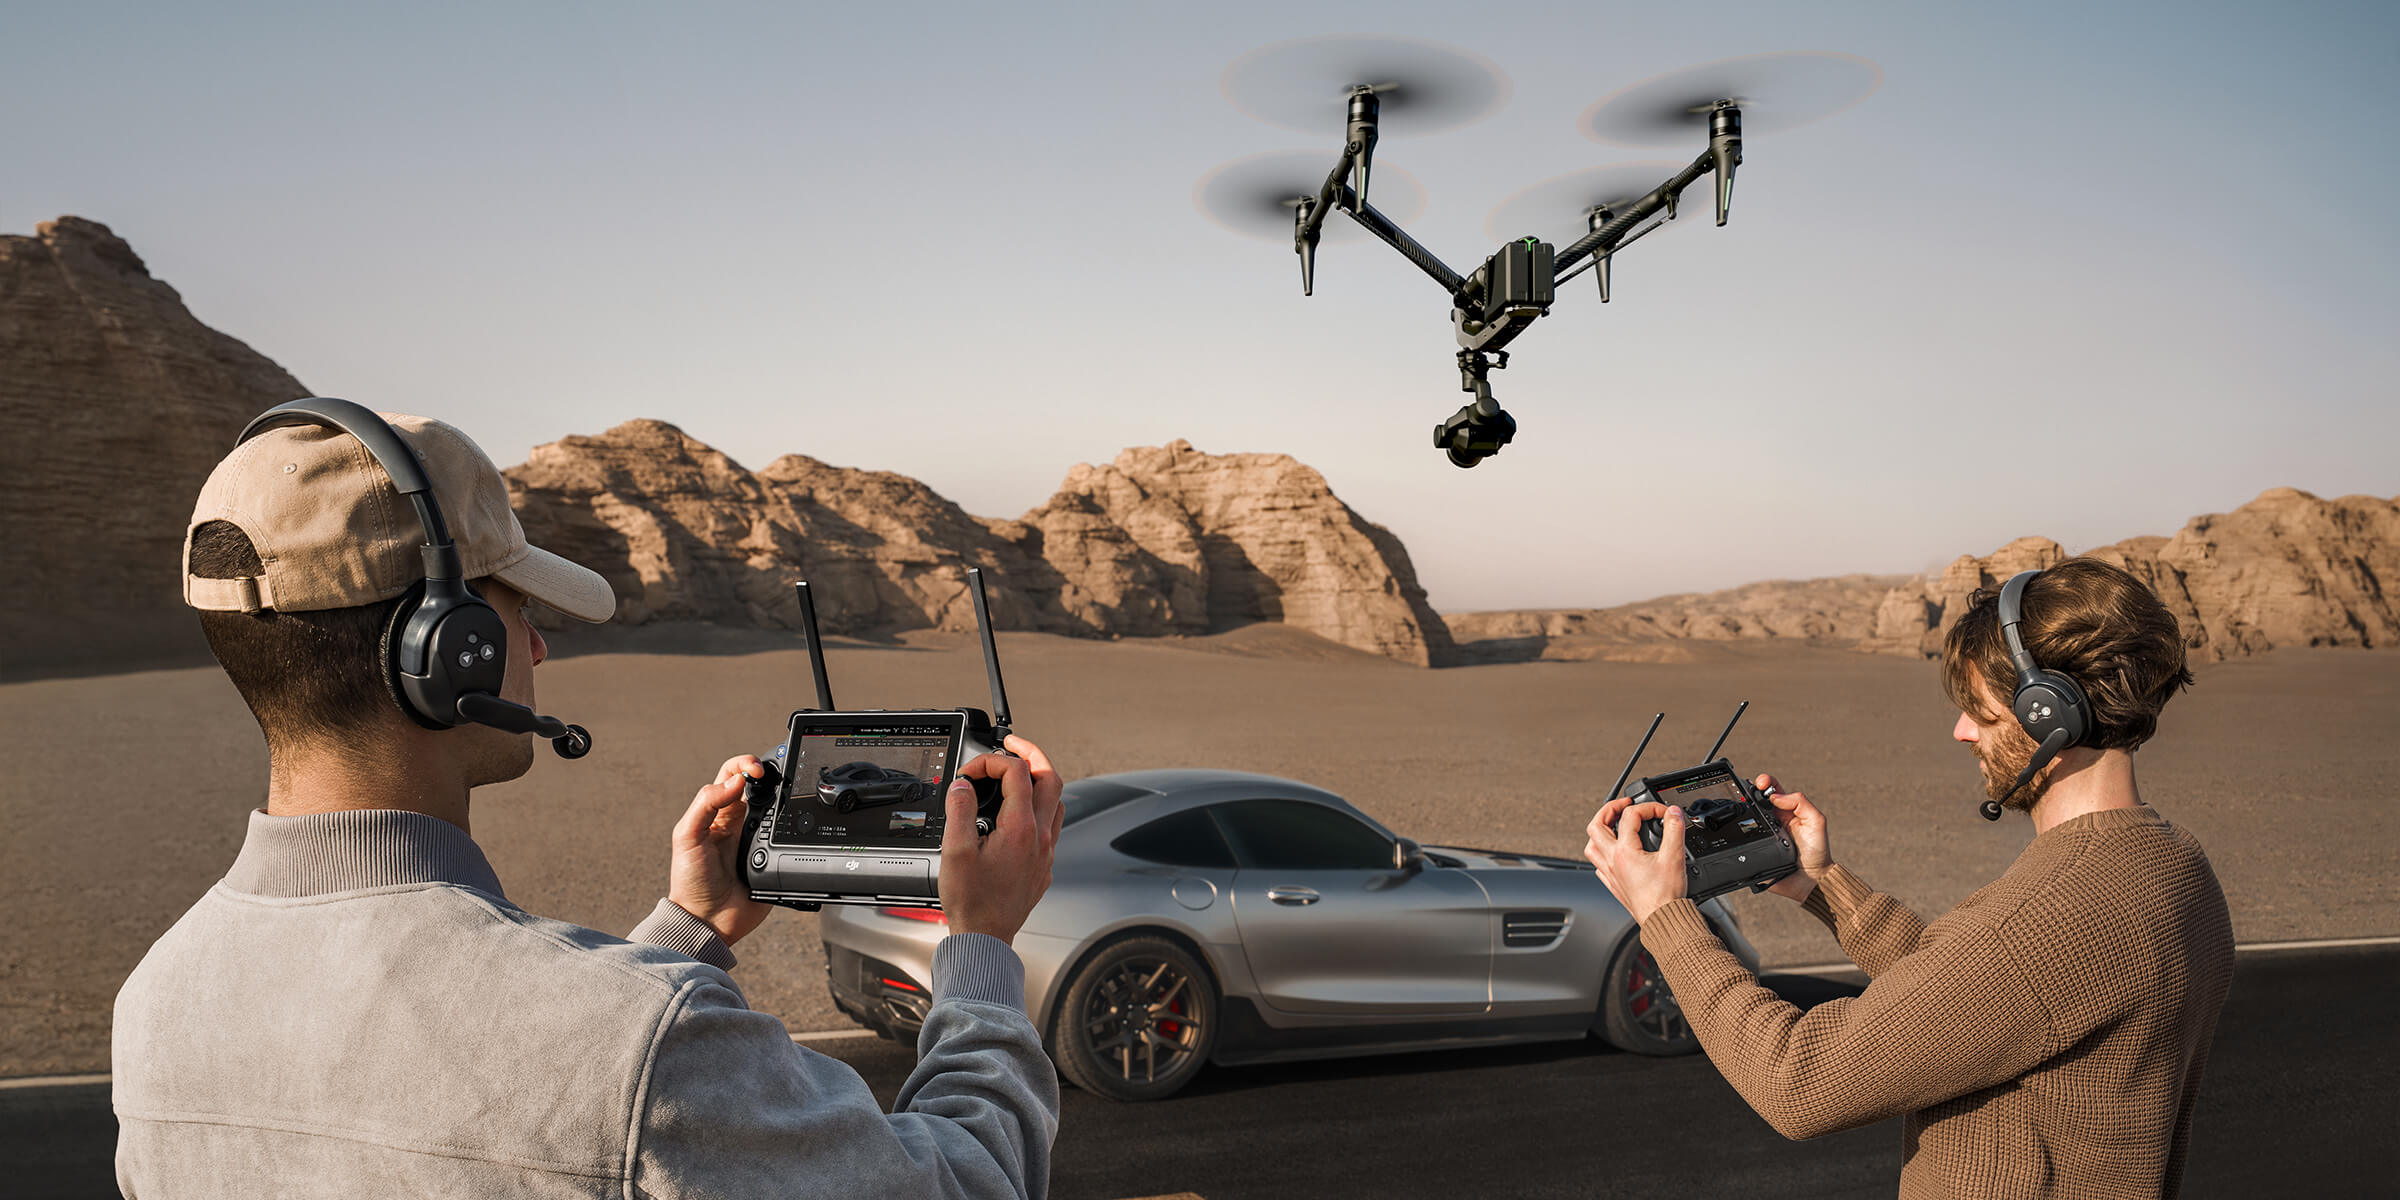 Put Your Camera in the Stunt with the DJI Avata FPV Drone